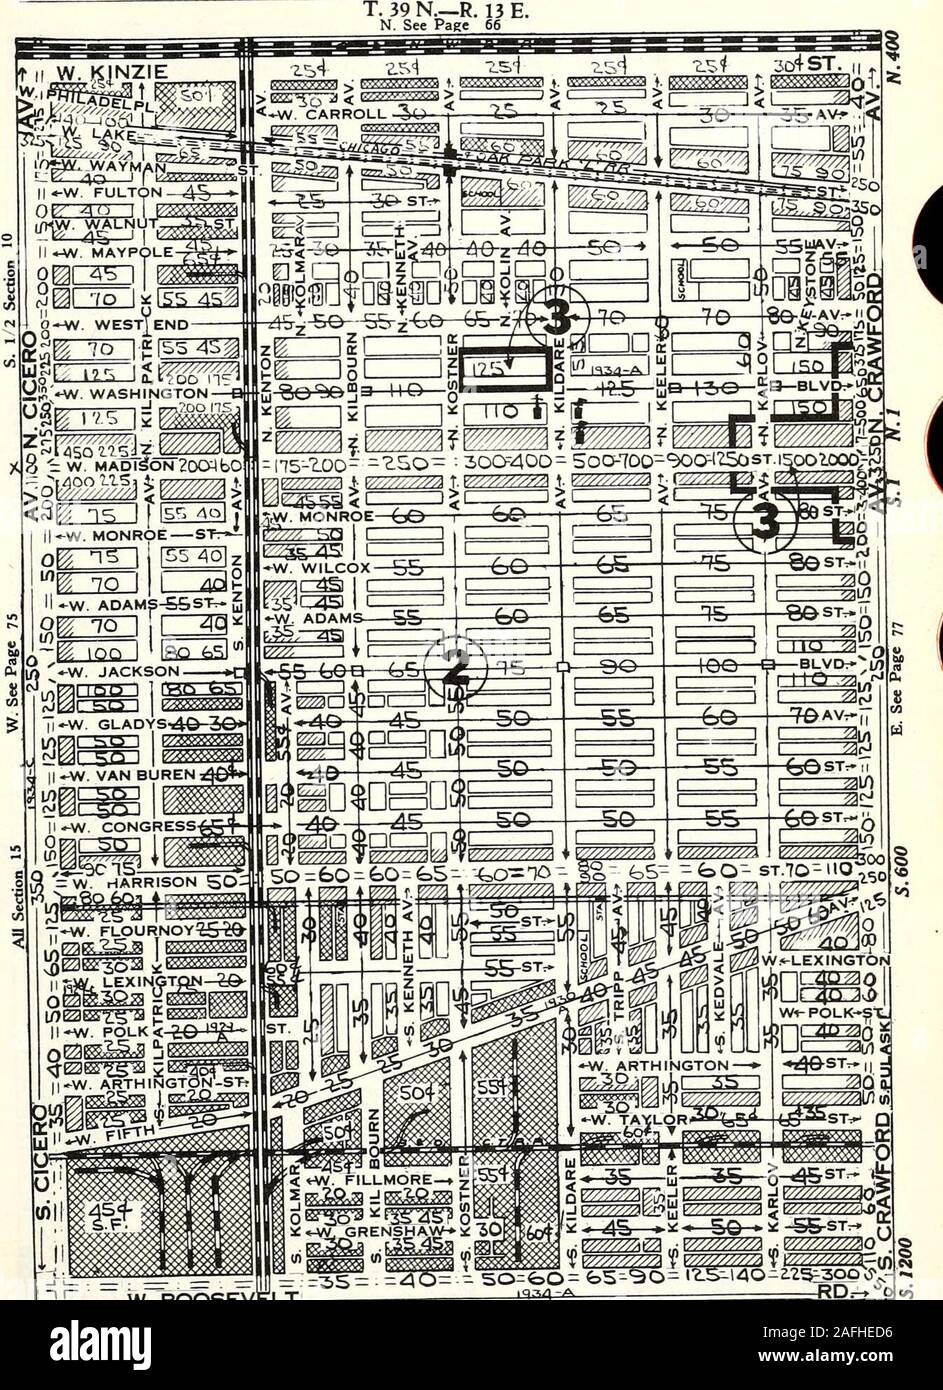 Olcott S Land Values Blue Book Of Chicago W Roosevelt Is54 A Ffls Rincq Ssw Swi Swj 5600 S See Page 85 W 4s00 Sec 9 Class 5 O 8 12 14 15 17 Ls A Ner Se Sec 9 Class 2 3 5 S 12 14 16 18 Amer Sec 16